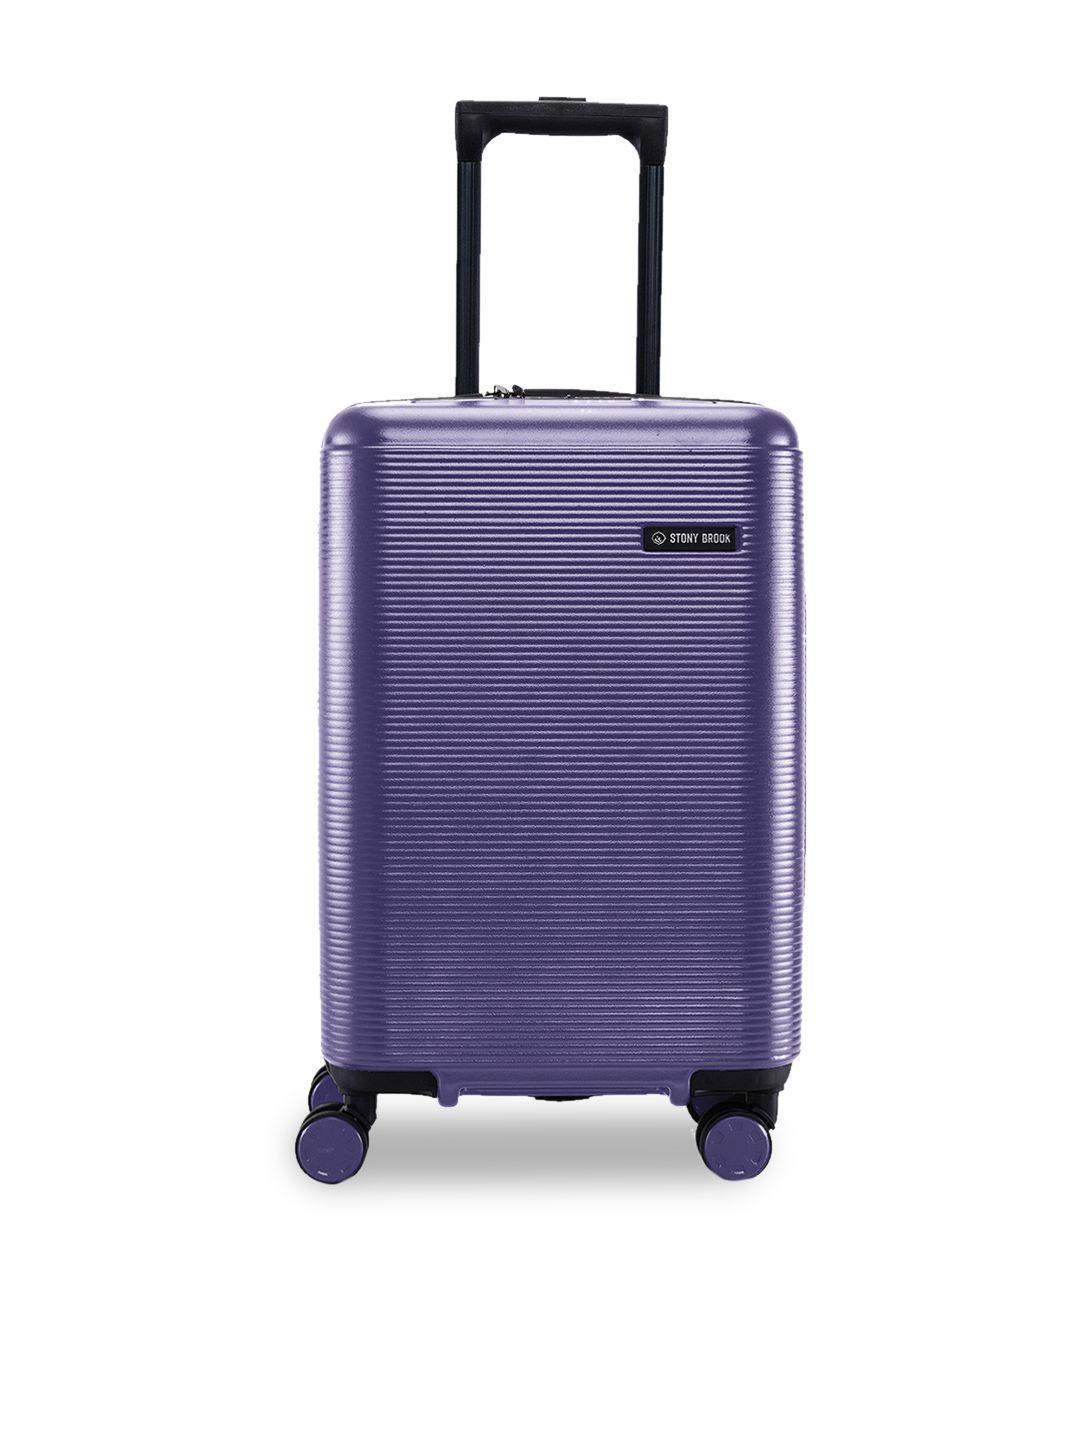 stony brook by nasher miles dunes textured hard-sided cabin trolley suitcase